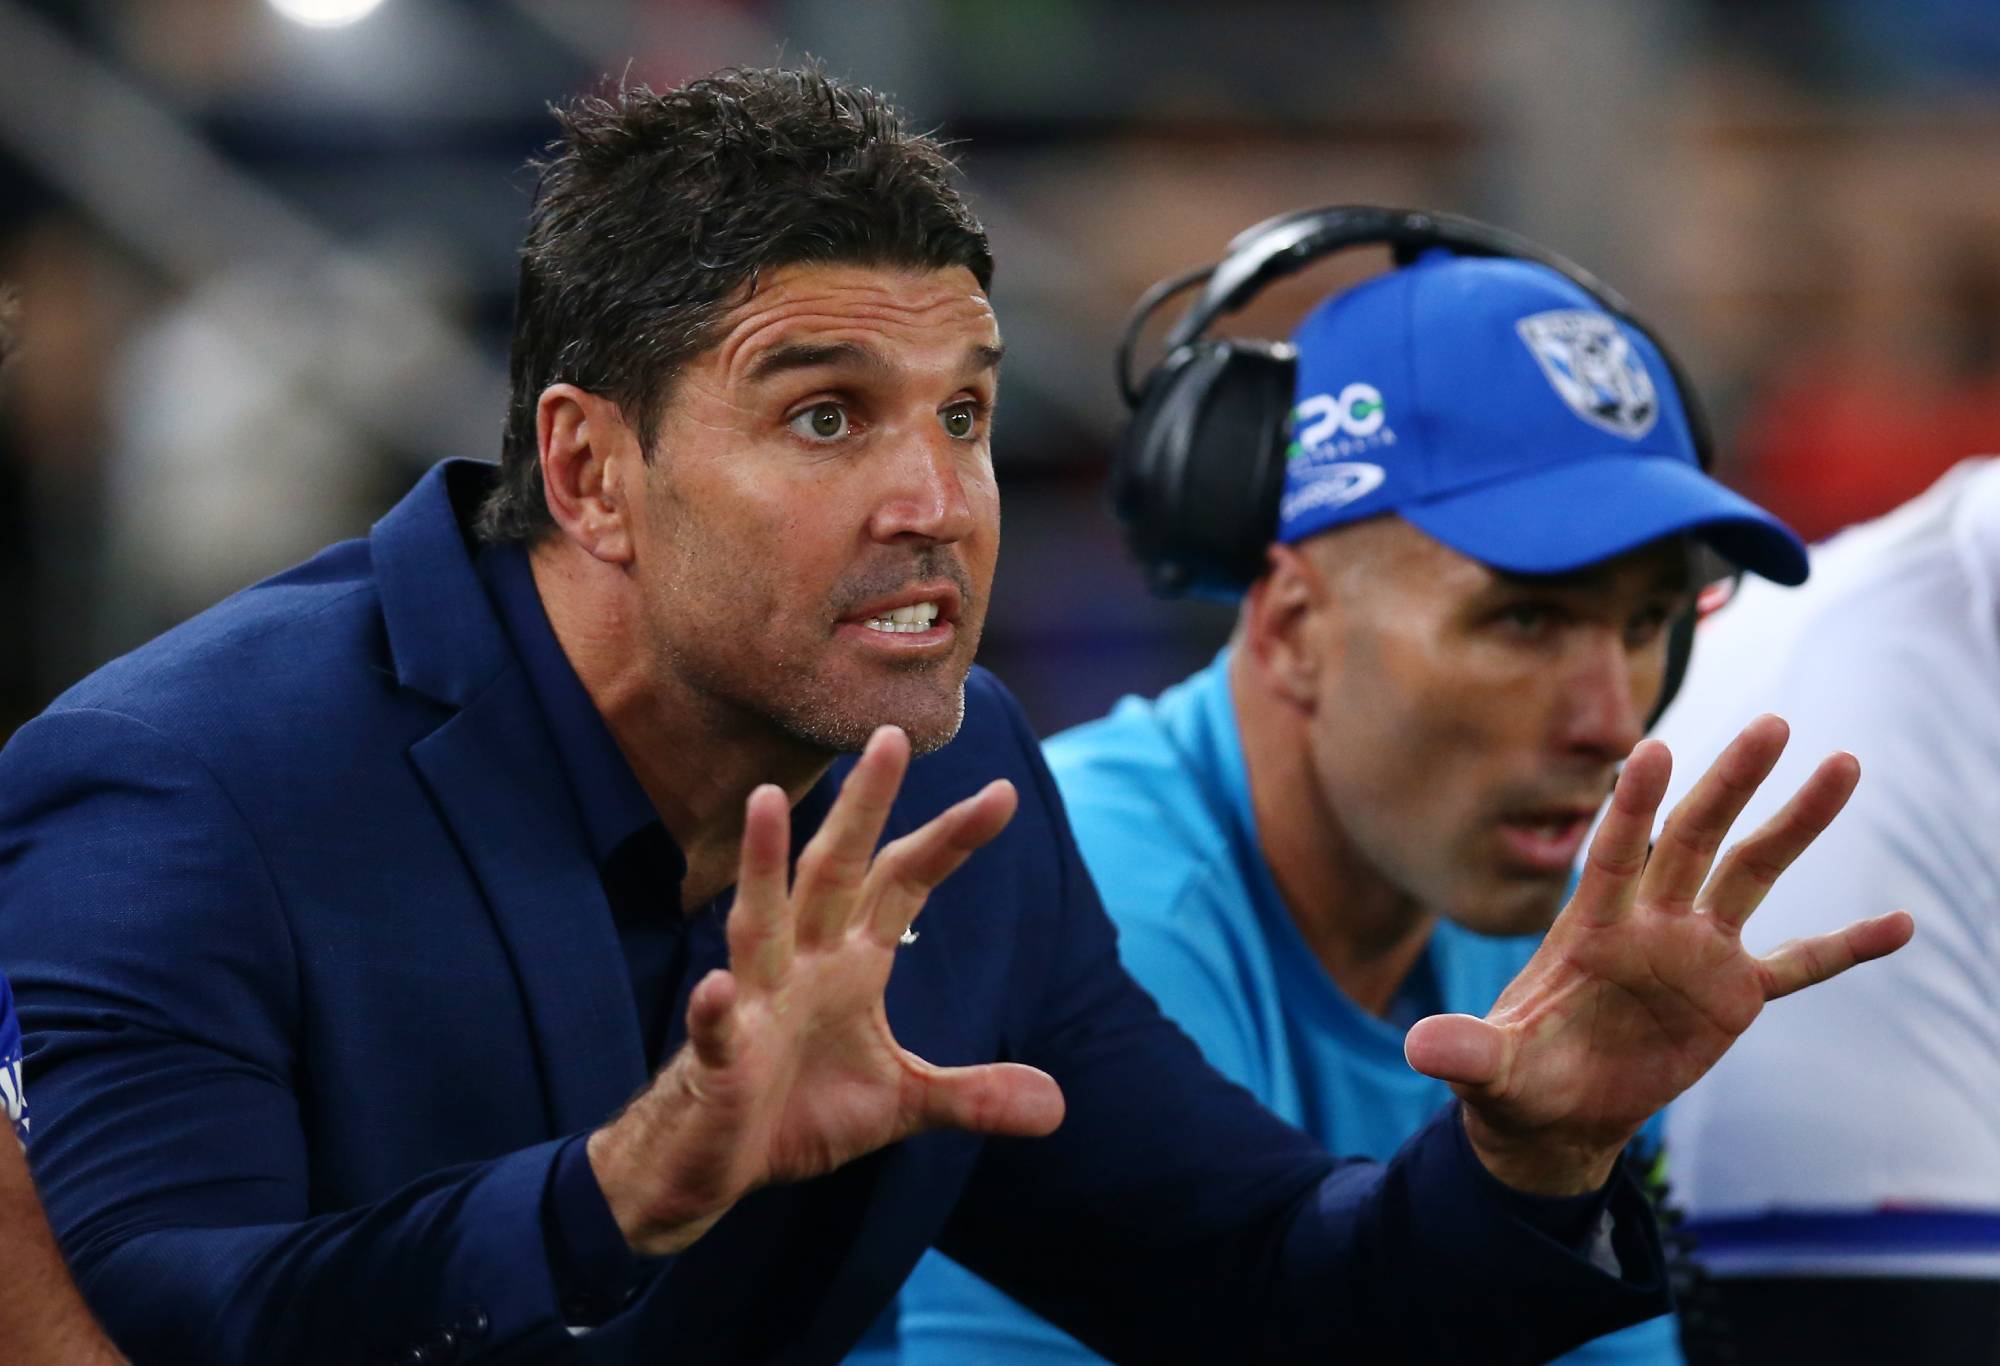 SYDNEY, AUSTRALIA - APRIL 30: Bulldogs coach Trent Barrett coaches from the players bench during the round eight NRL match between the Canterbury Bulldogs and the Sydney Roosters at Stadium Australia on April 30, 2022 in Sydney, Australia. (Photo by Jason McCawley/Getty Images)